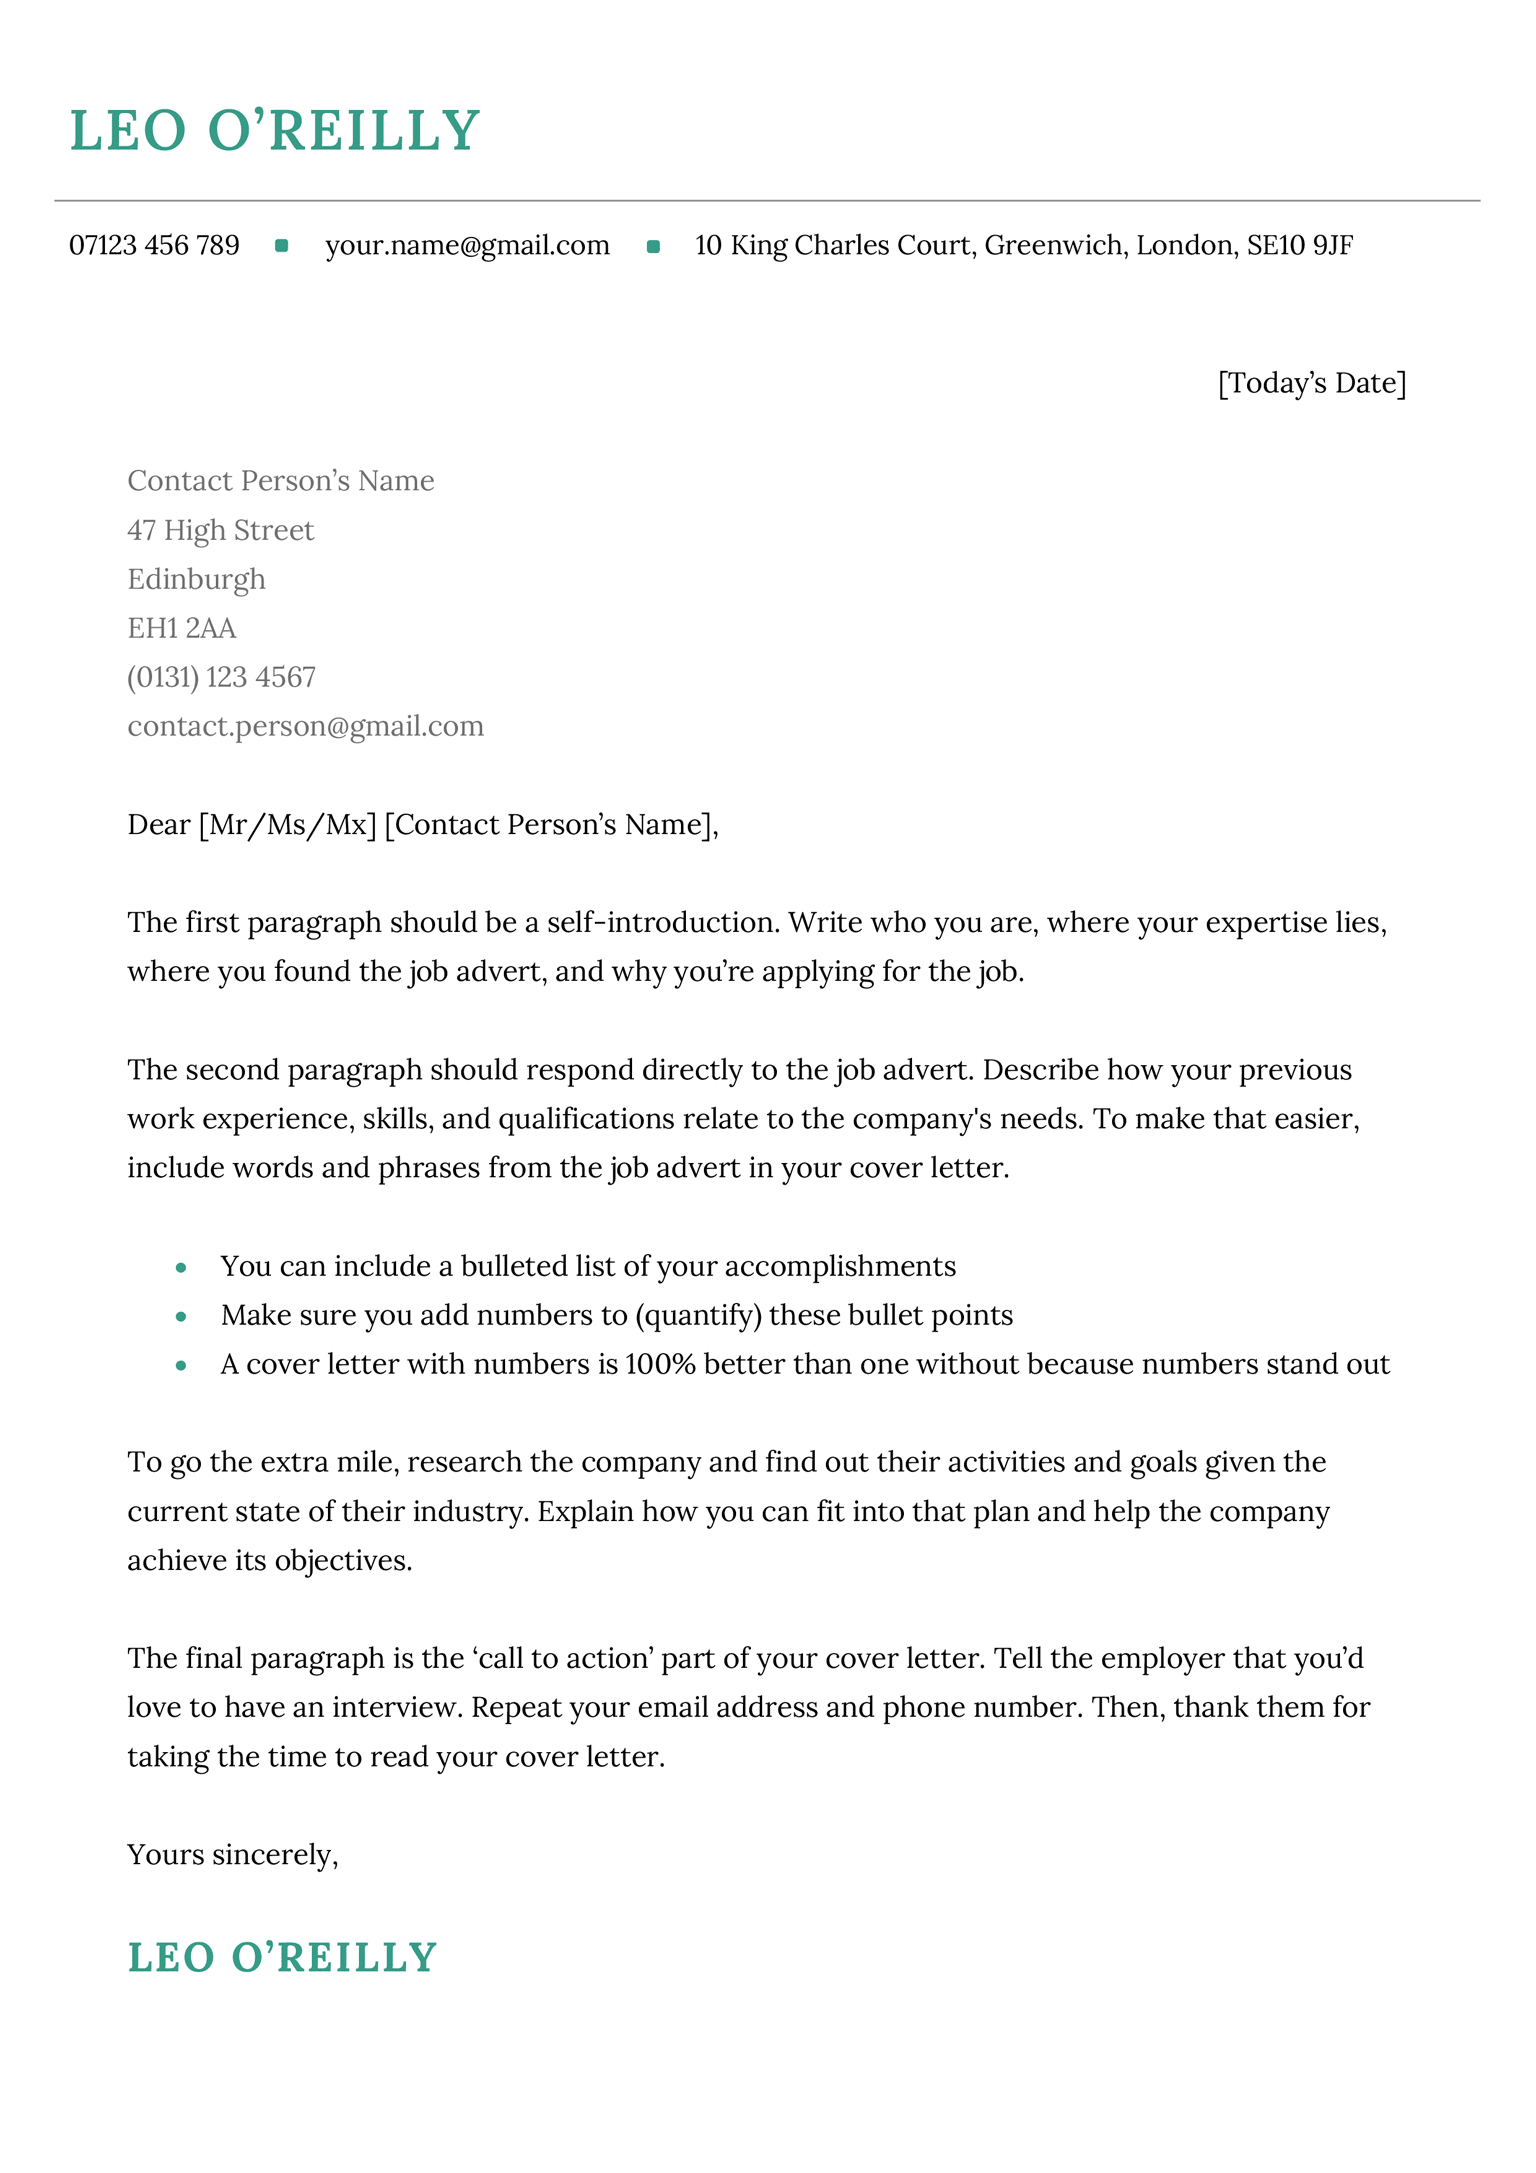 The York cover letter template in green.